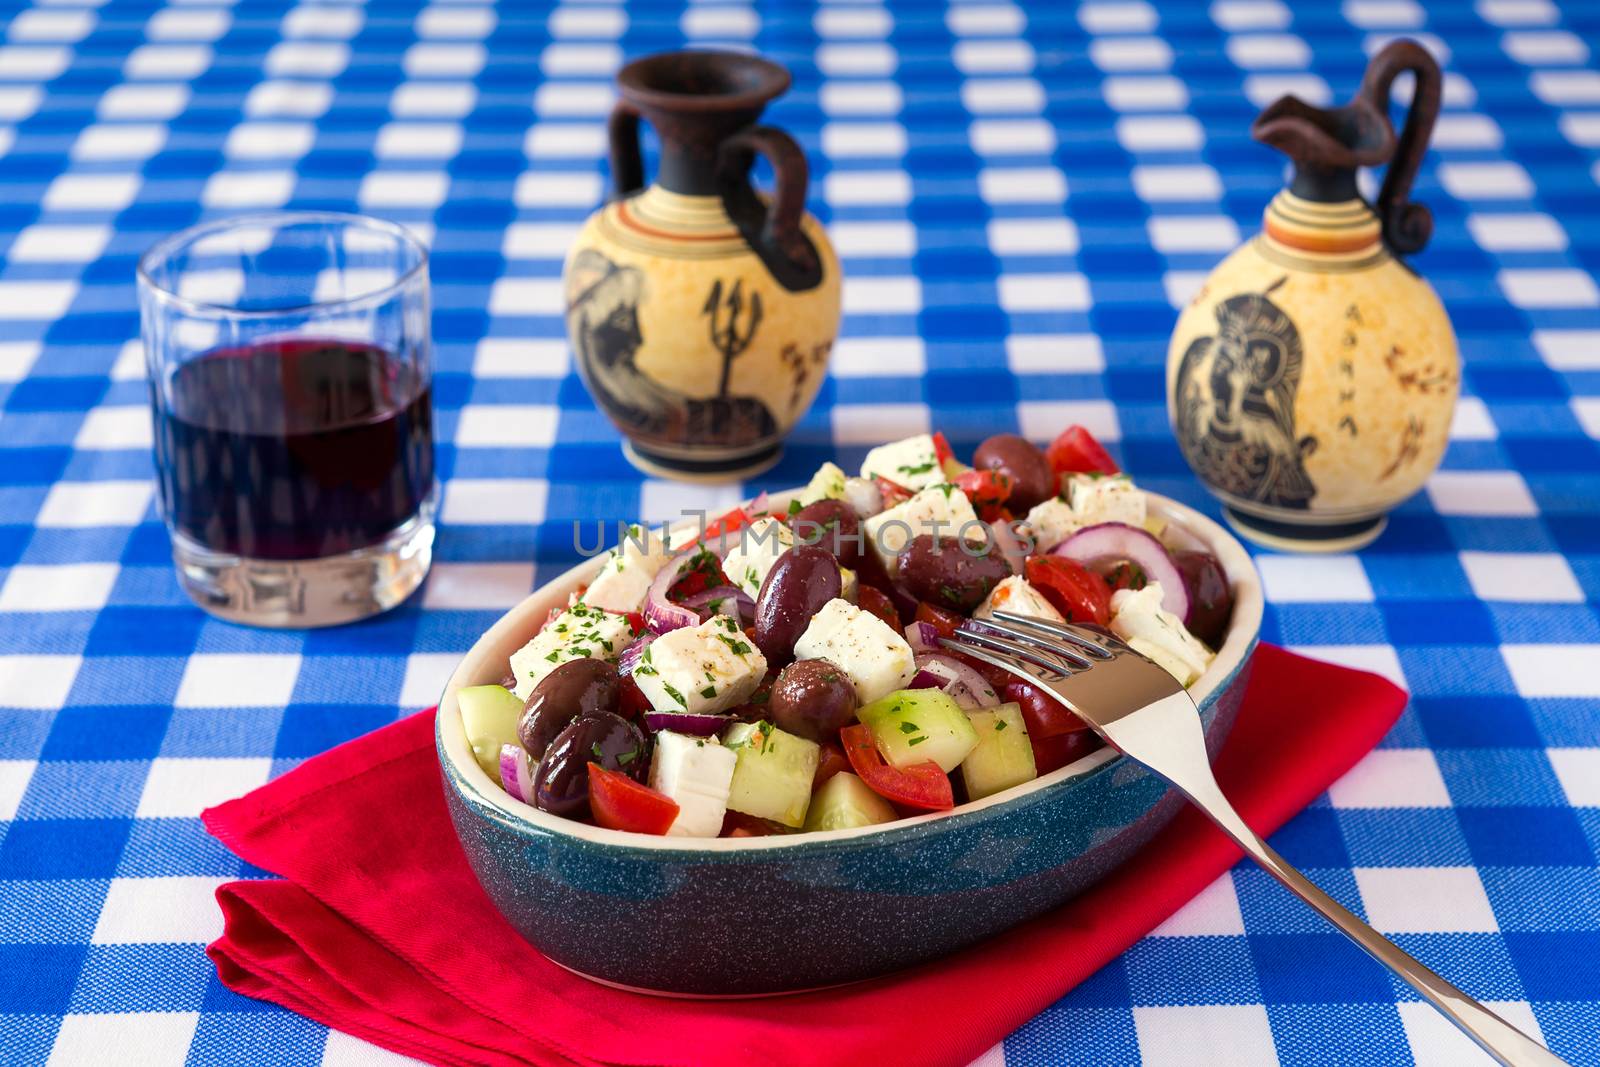 Greek salad with feta cheese tomatoes cucumber olives and onions with red wine and greek amphorae over a checkered tablecloth